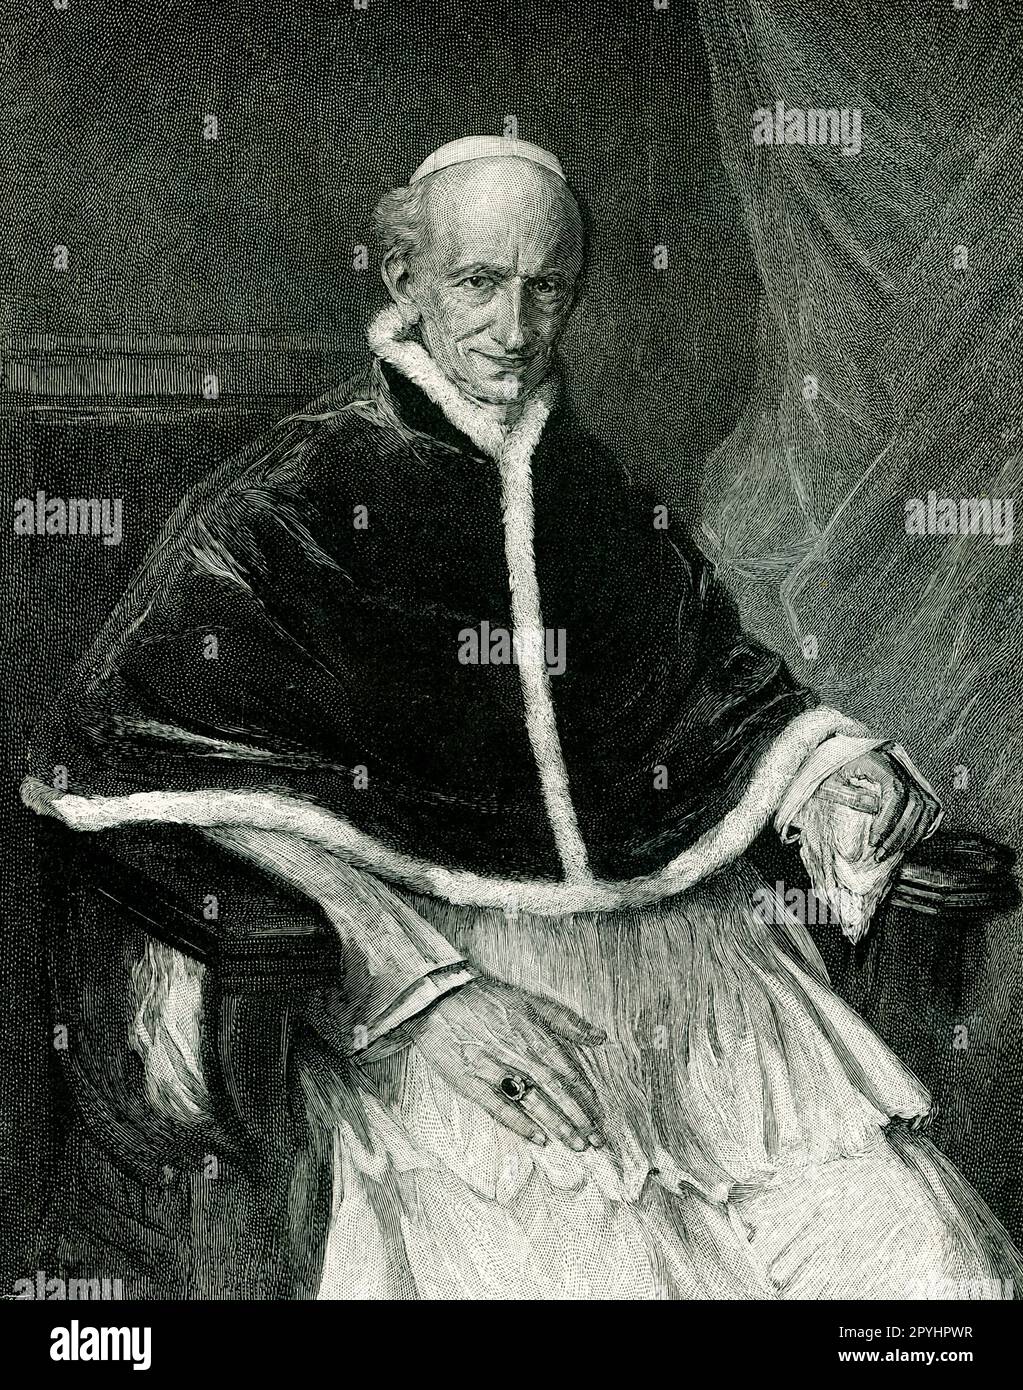 This image from an 1896 issue of Century Magazine shows Pope Leo XIII, an engraving by Johnson after a photograph of a painting by Lenbach in Munich. It was reprinted from 'The Century' for May 1888. Pope Leo XIII was head of the Catholic Church from February 1878 until his death in July 1903. Living until the age of 93, he was the oldest pope holding office, and had the fourth-longest reign of any pope, behind those of St. Peter, Pius IX and John Paul II. Stock Photo